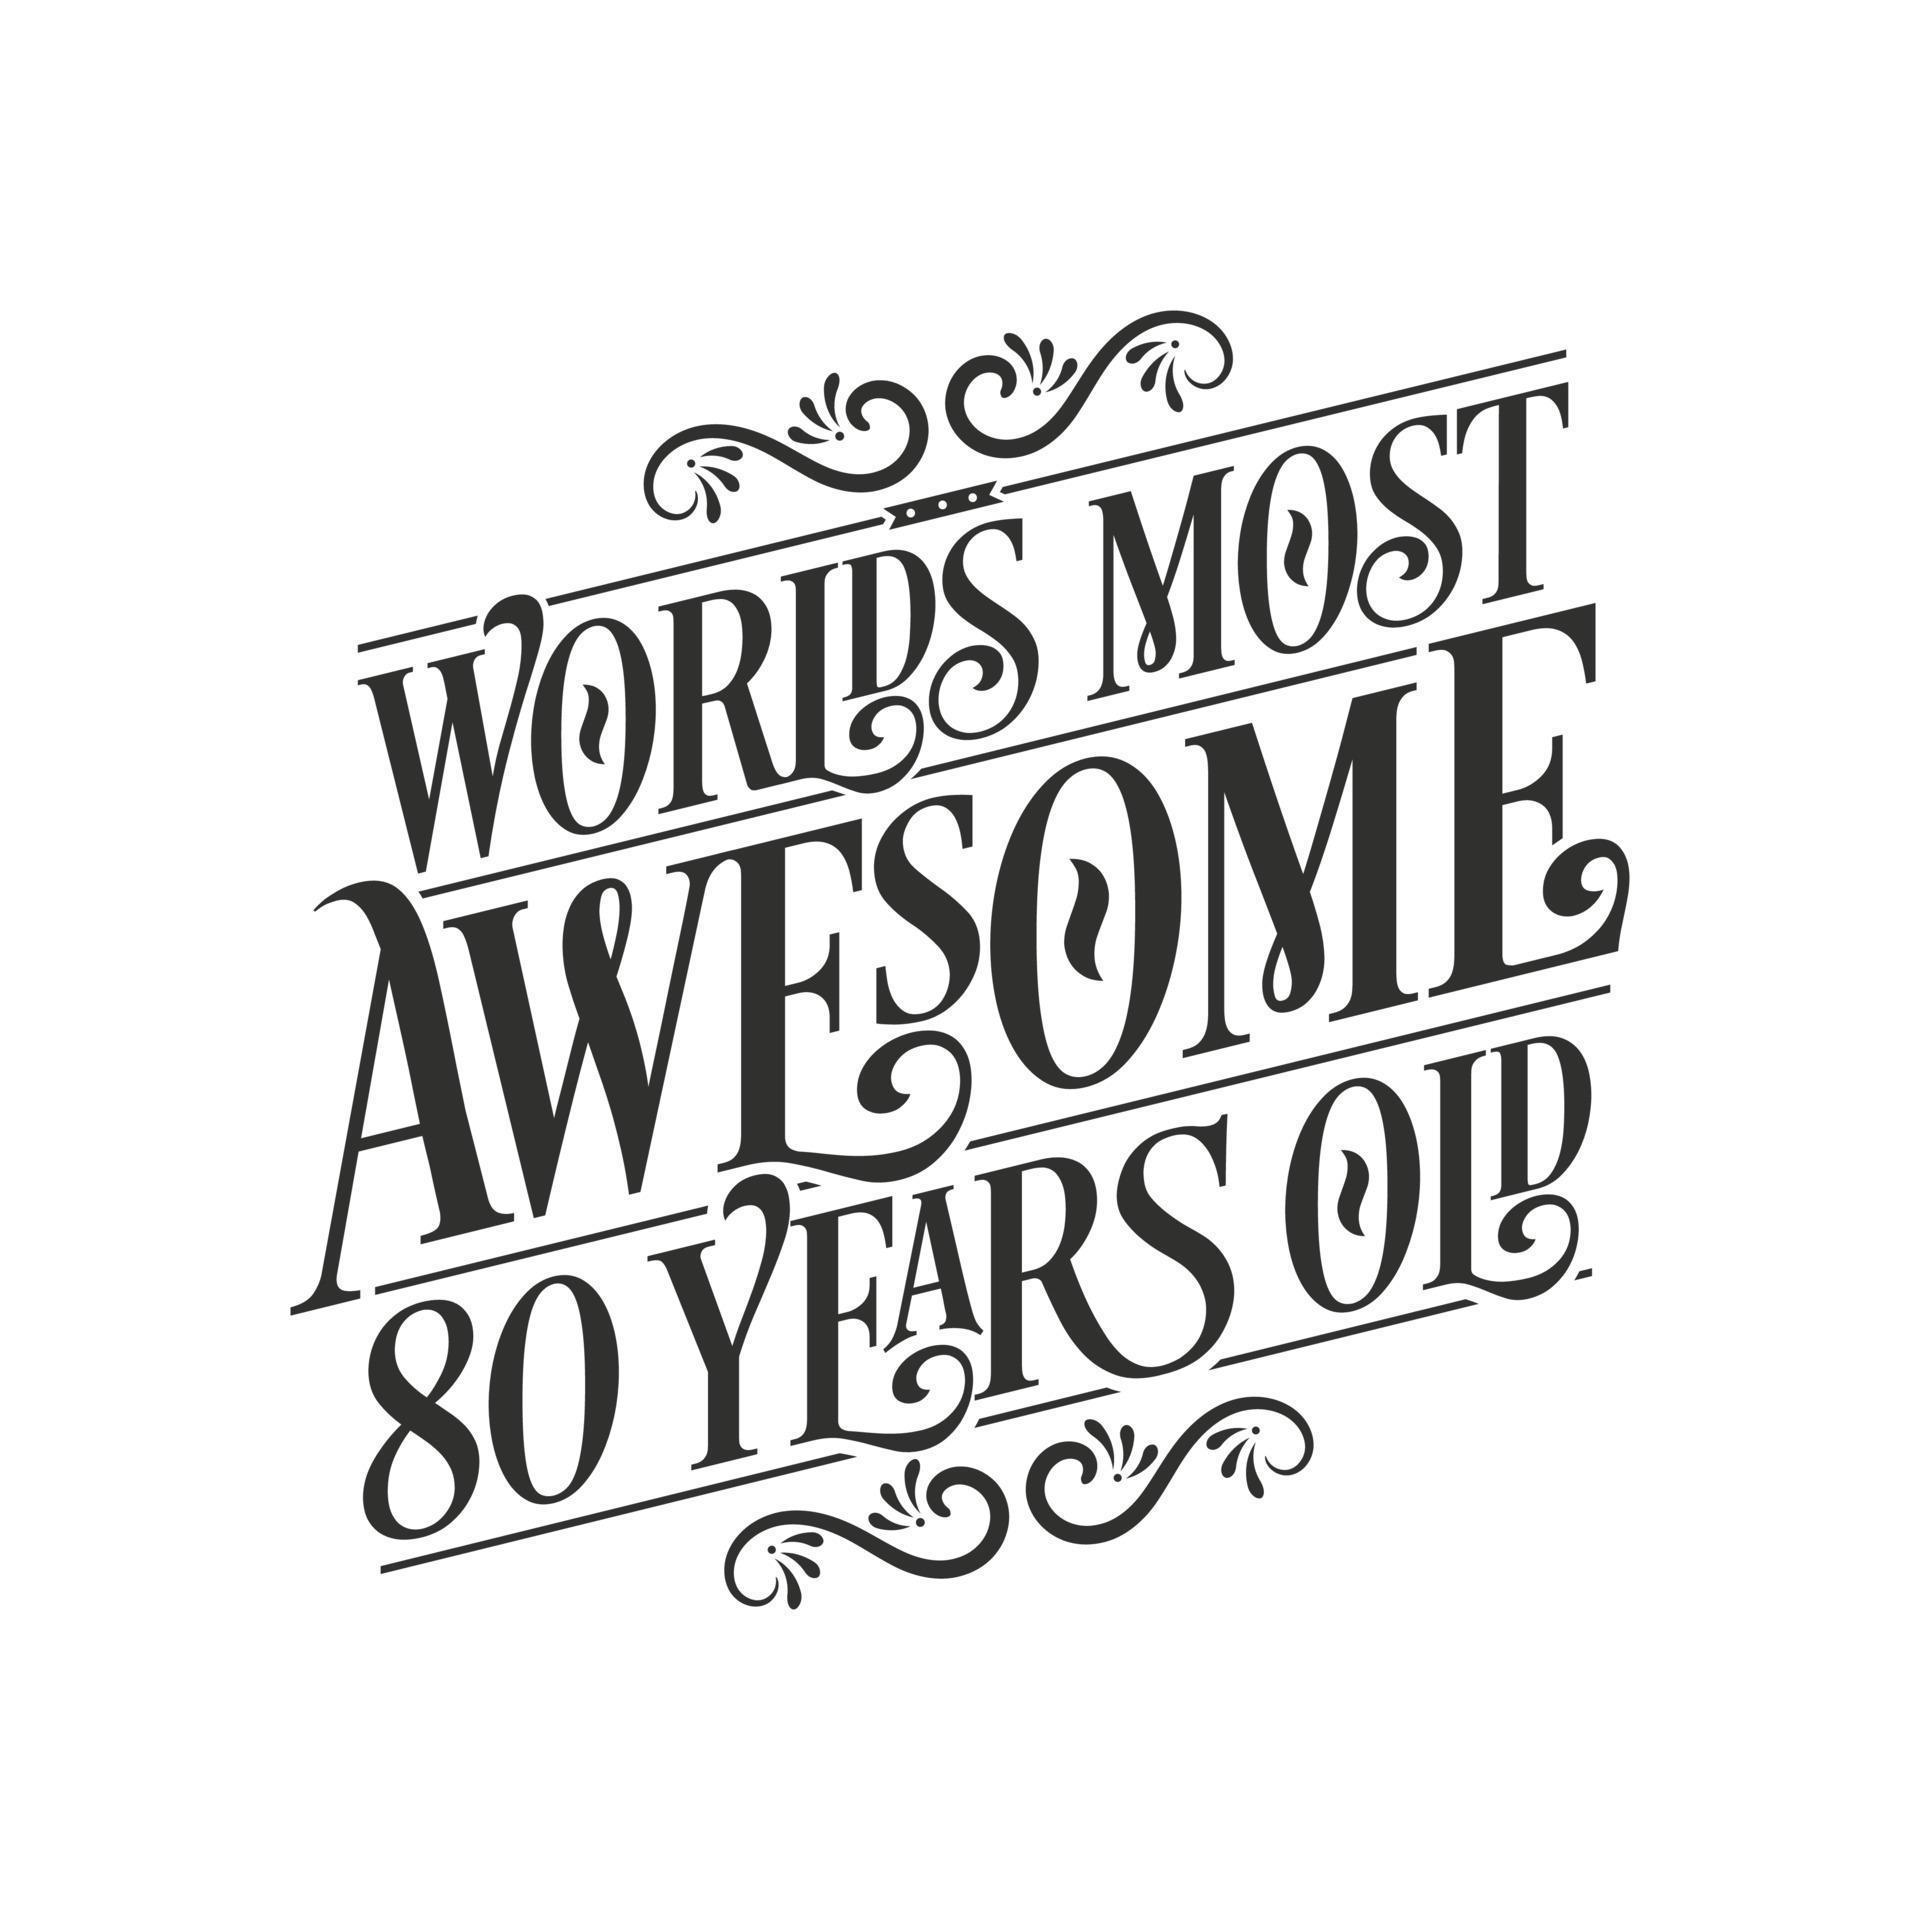 world-s-most-awesome-80-years-old-80-years-birthday-celebration